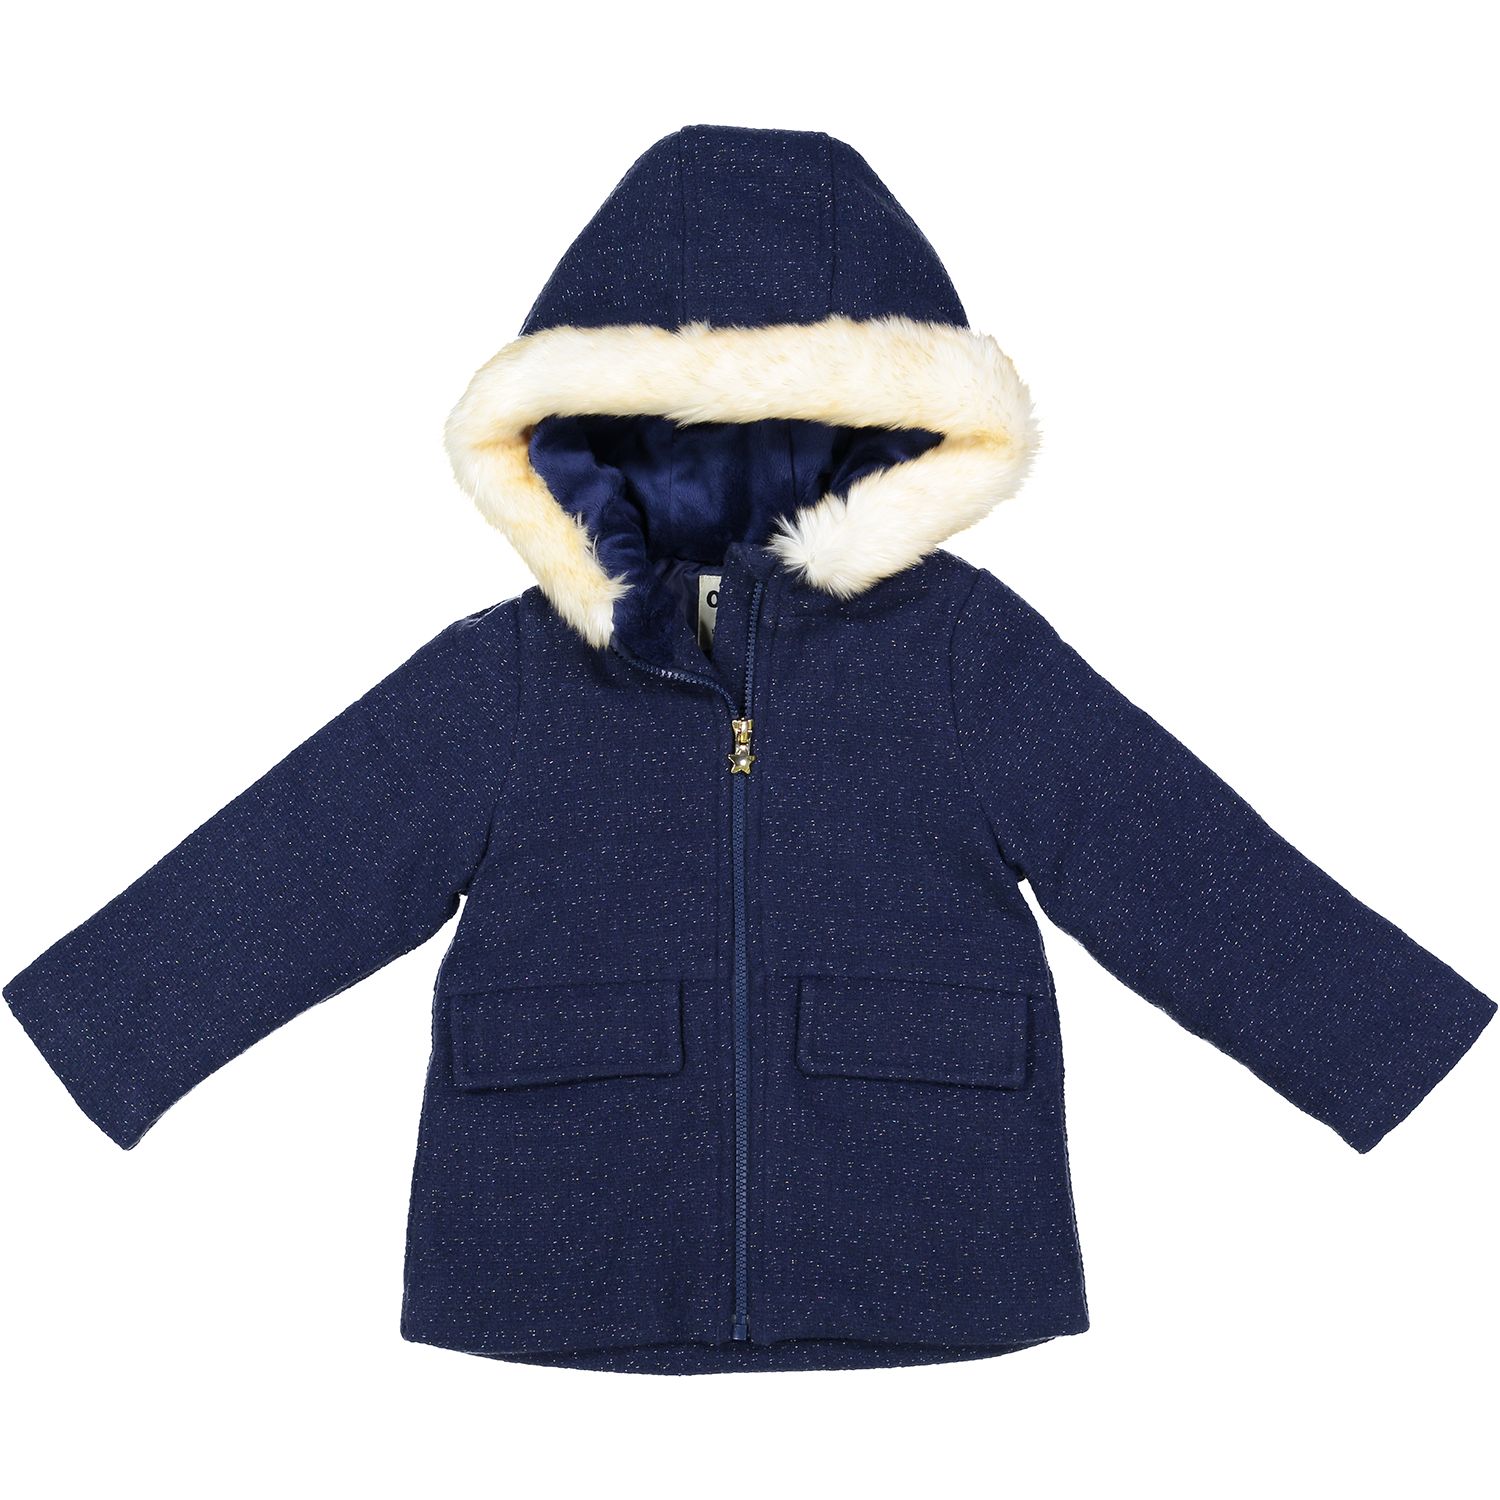 wool coats for toddlers